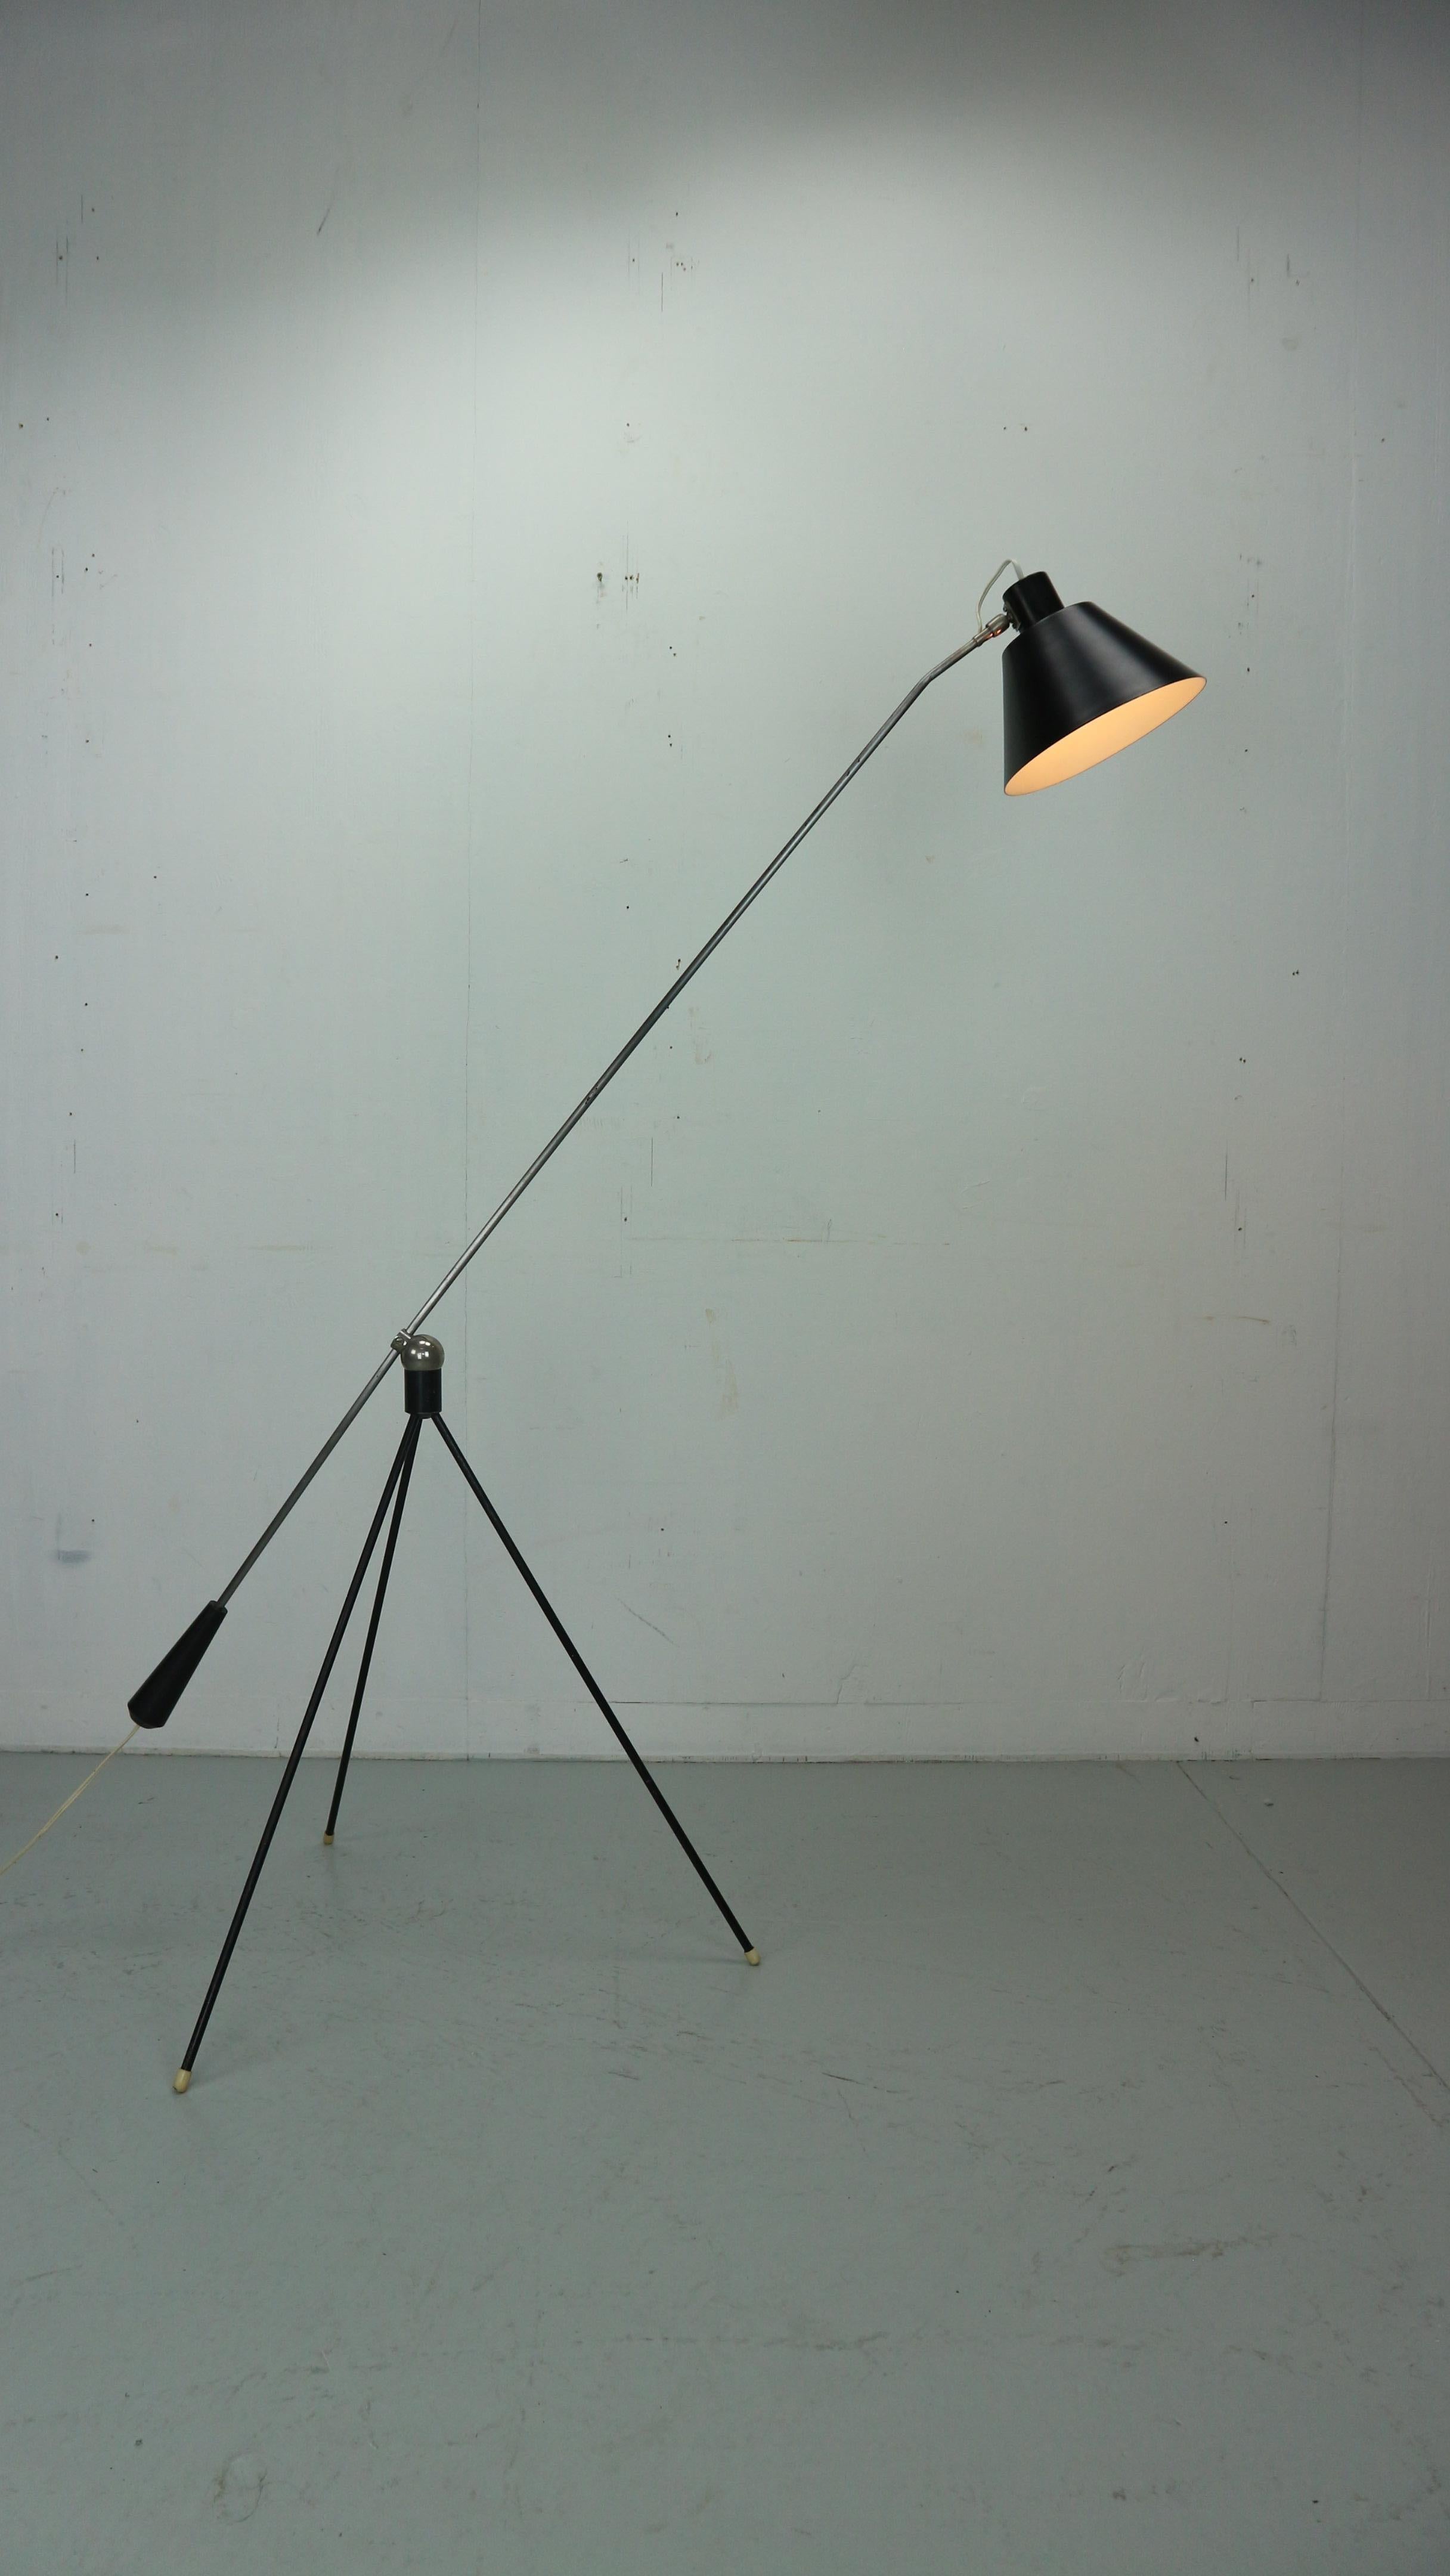 Admire this ‘Magneto’ floor lamp by H. Fillekes for Artiforte, the Netherlands, 1954. This minimalistic floor lamp features a lacquered metal tripod foot which is connected to a balance arm using a round shaped magnet and therefore allowing to place